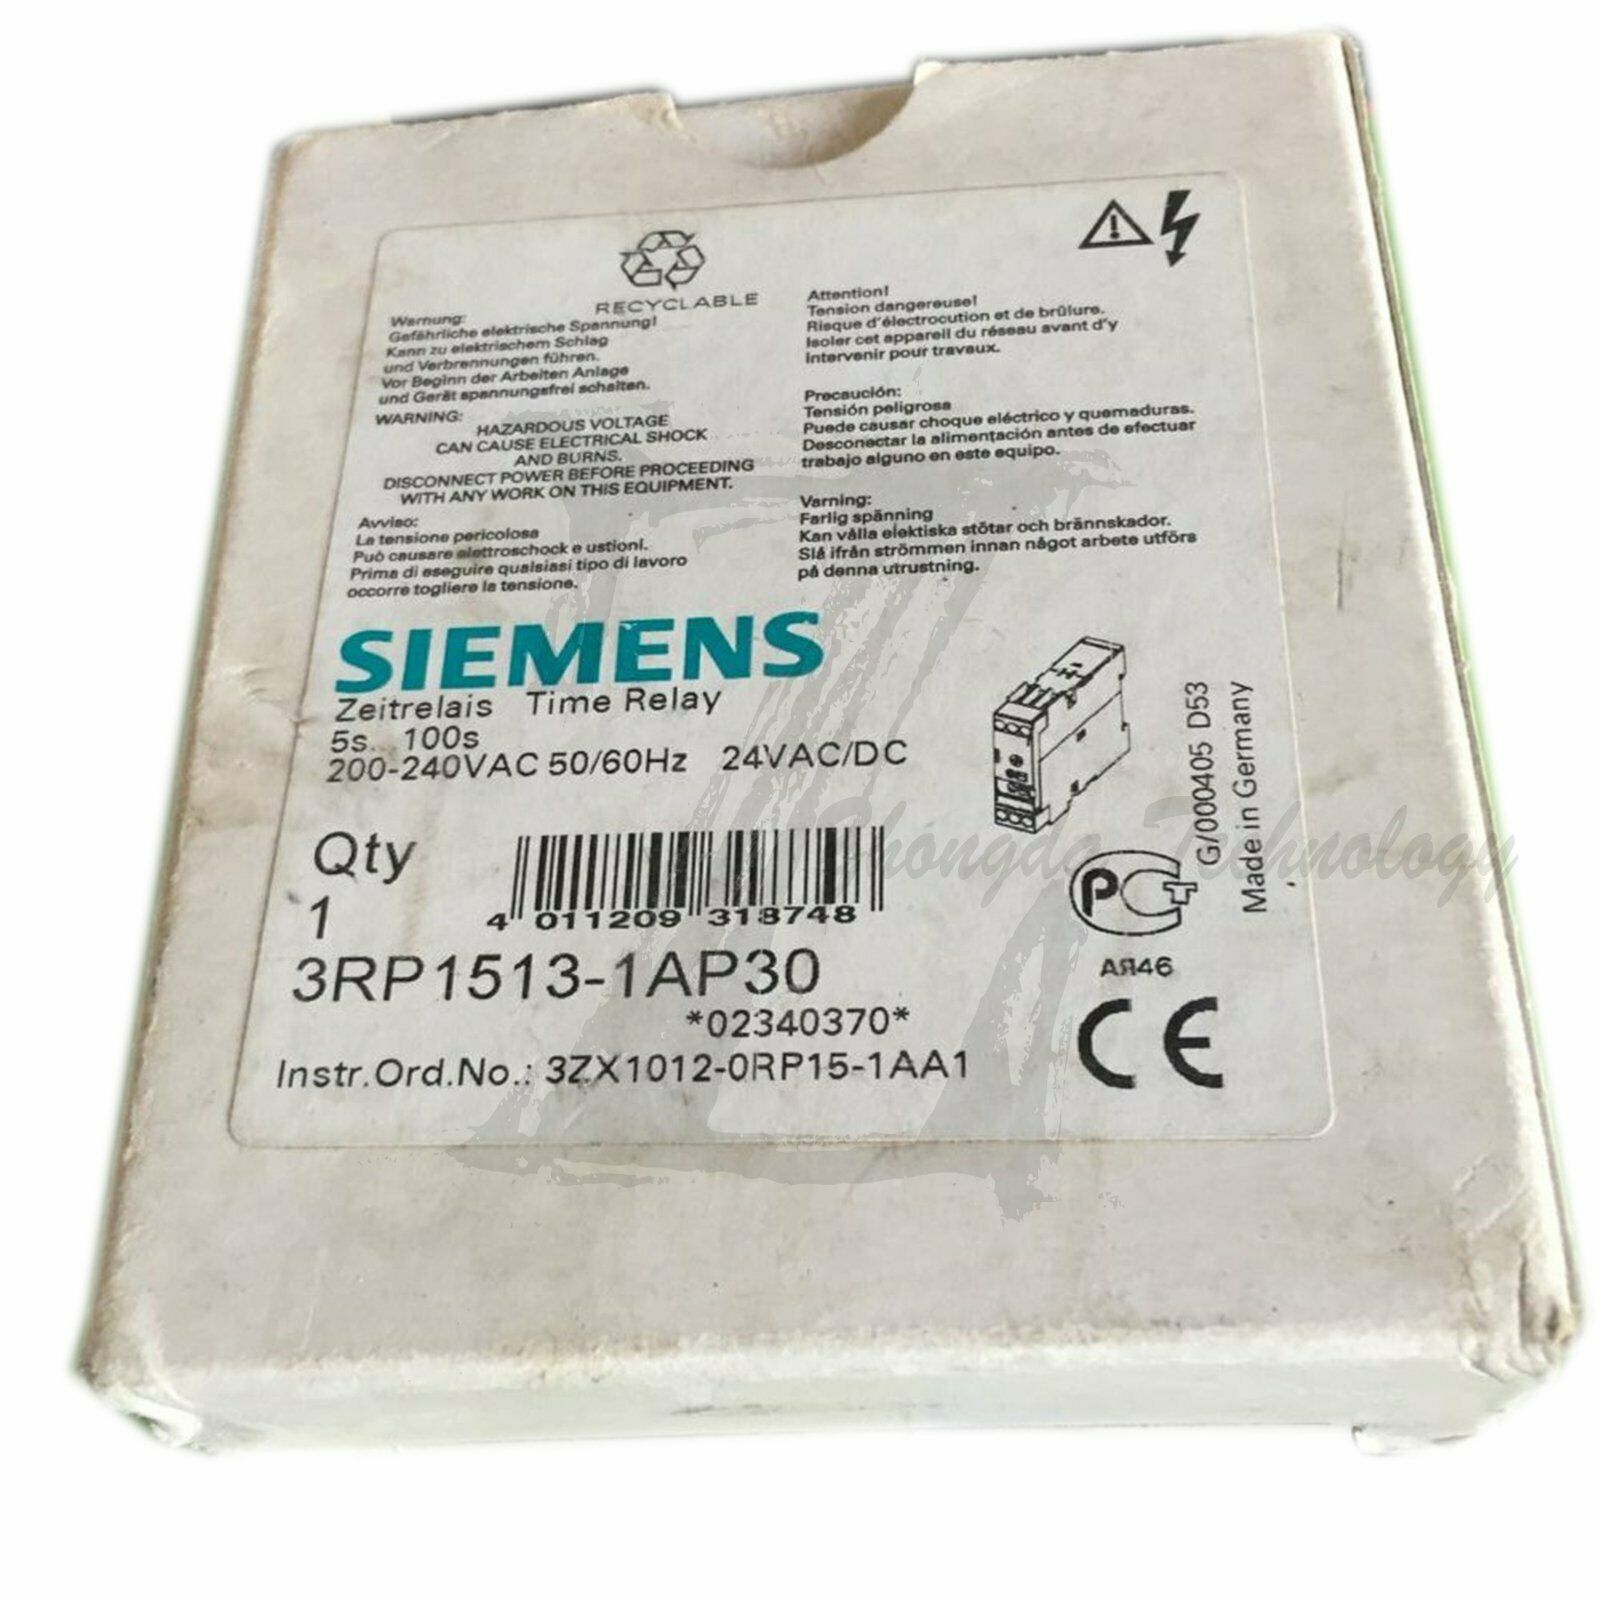 New Siemens Time Relay 3RP1513-1AP30 5-100S